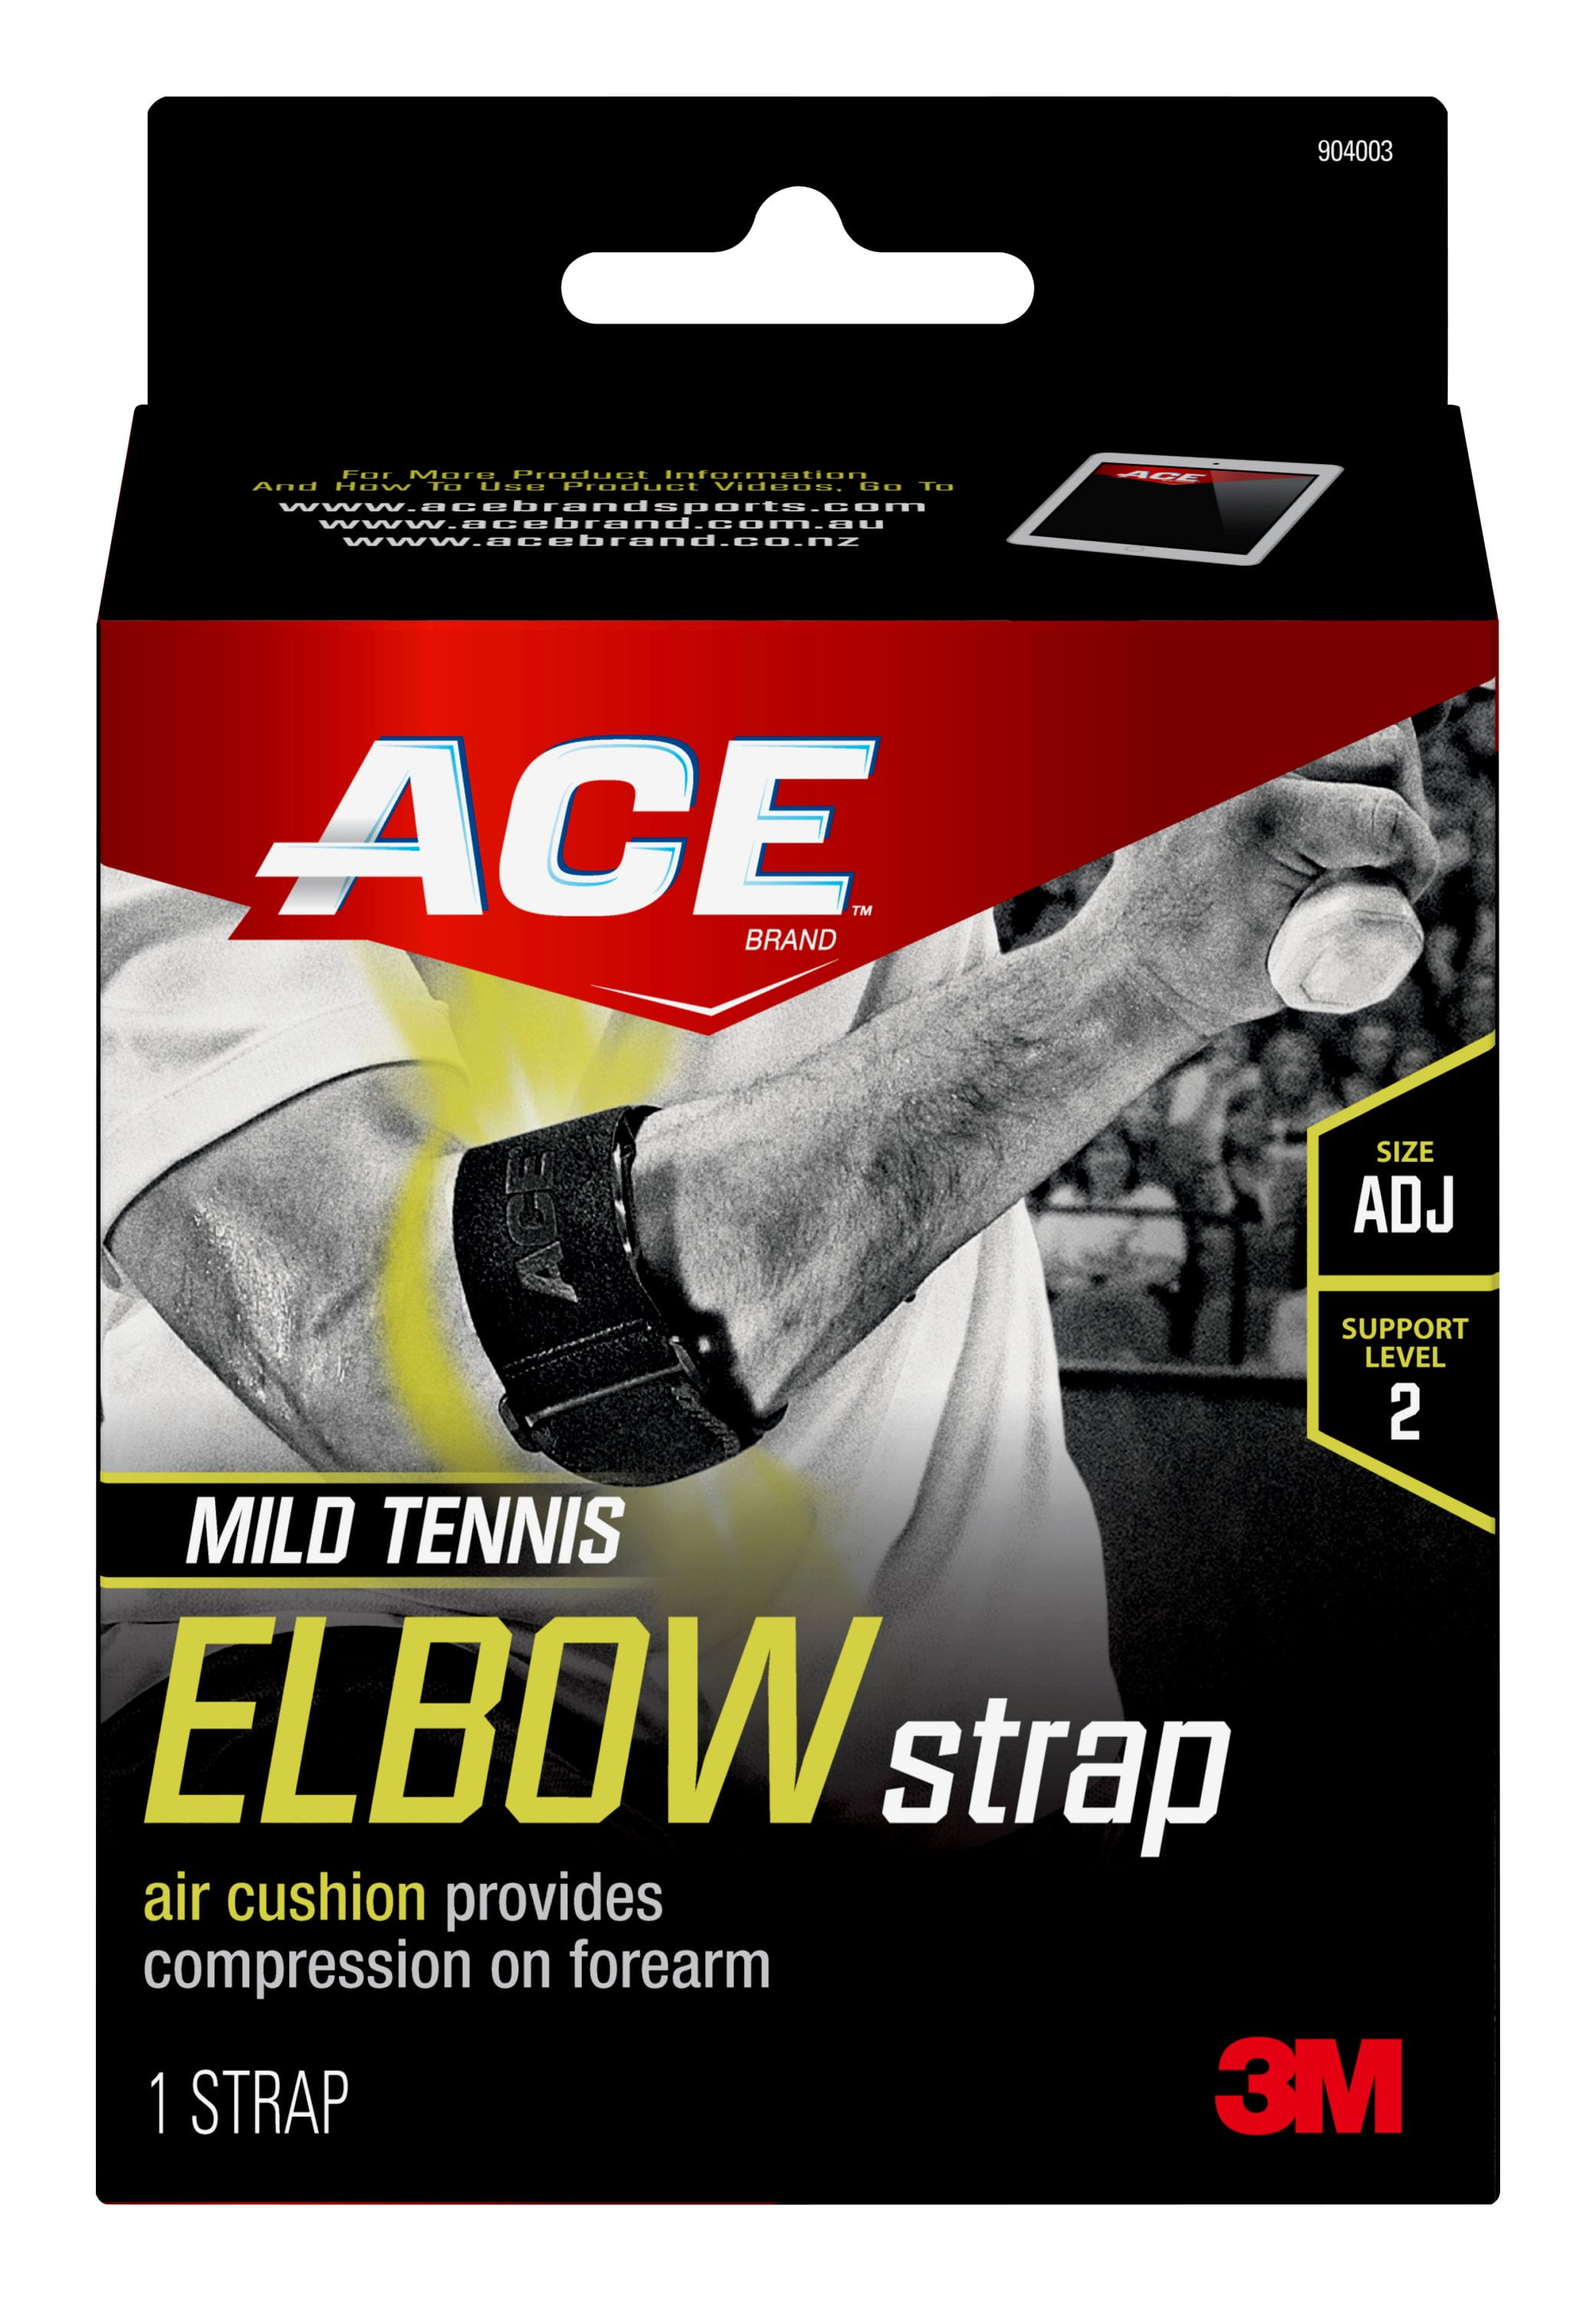 ACE Brand Mild Tennis Elbow Strap, Forearm Compression Brace, One Size Fits Most